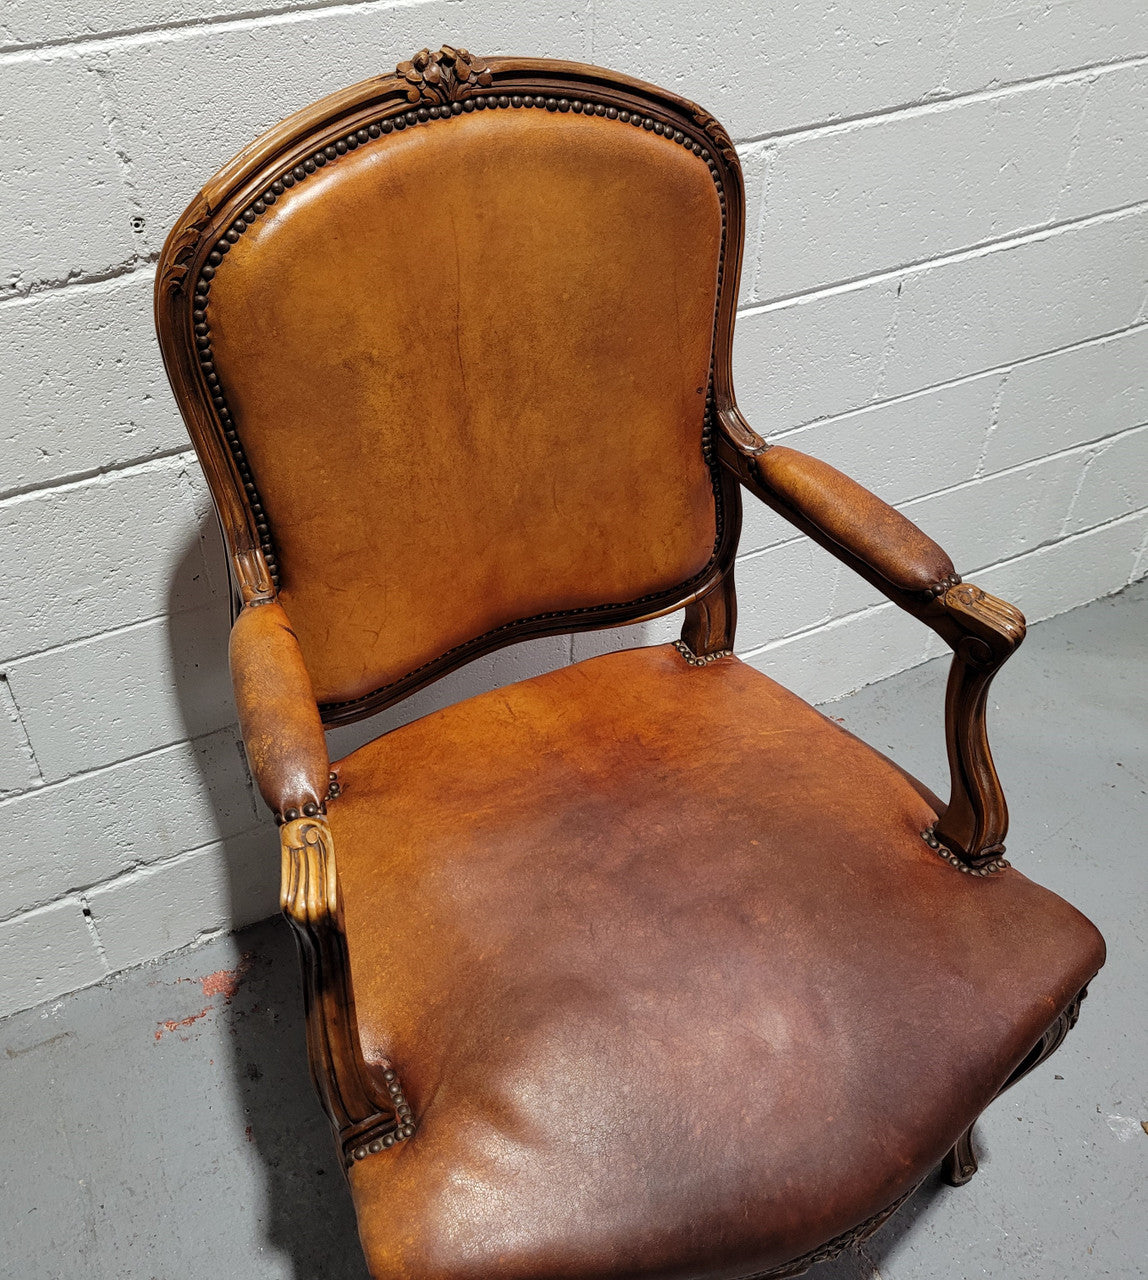 French Walnut Louis XV style desk chair with faux leather upholstery. The upholstery is in good original condition and very comfortable to sit in.